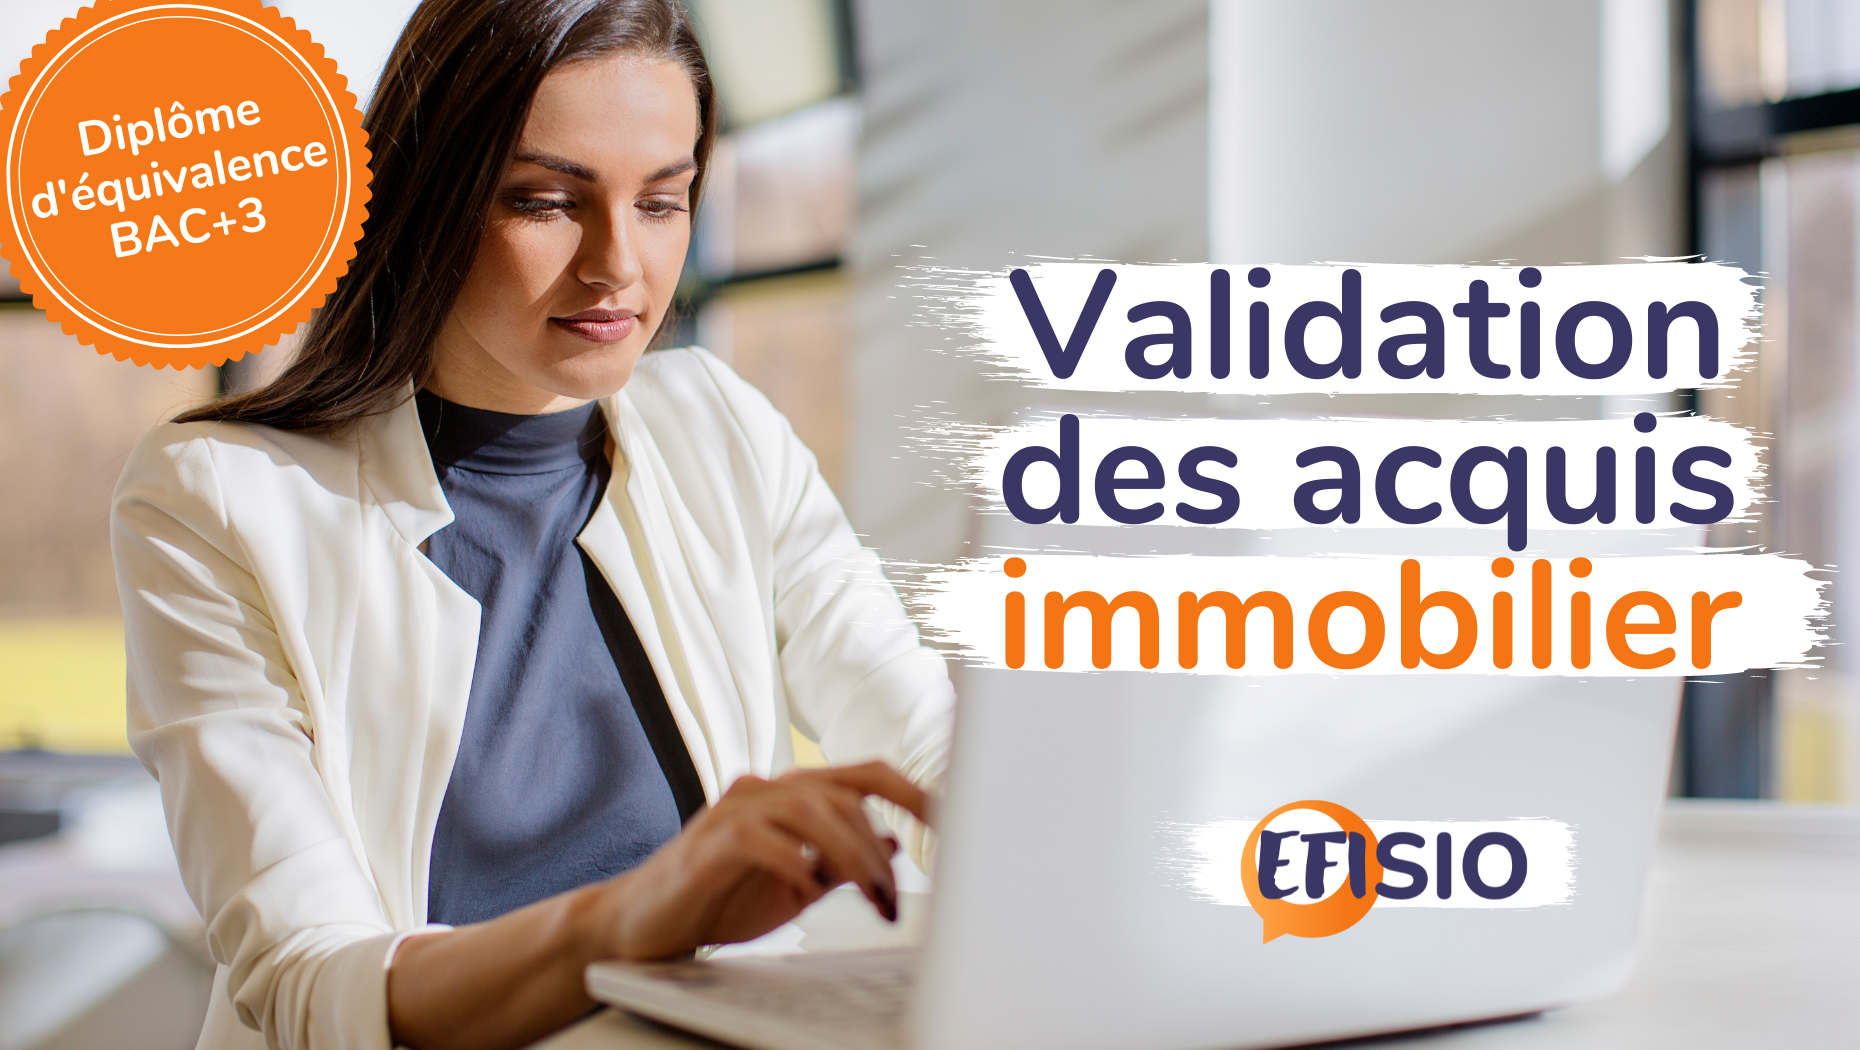 Validation des acquis immobilier - EFISIO